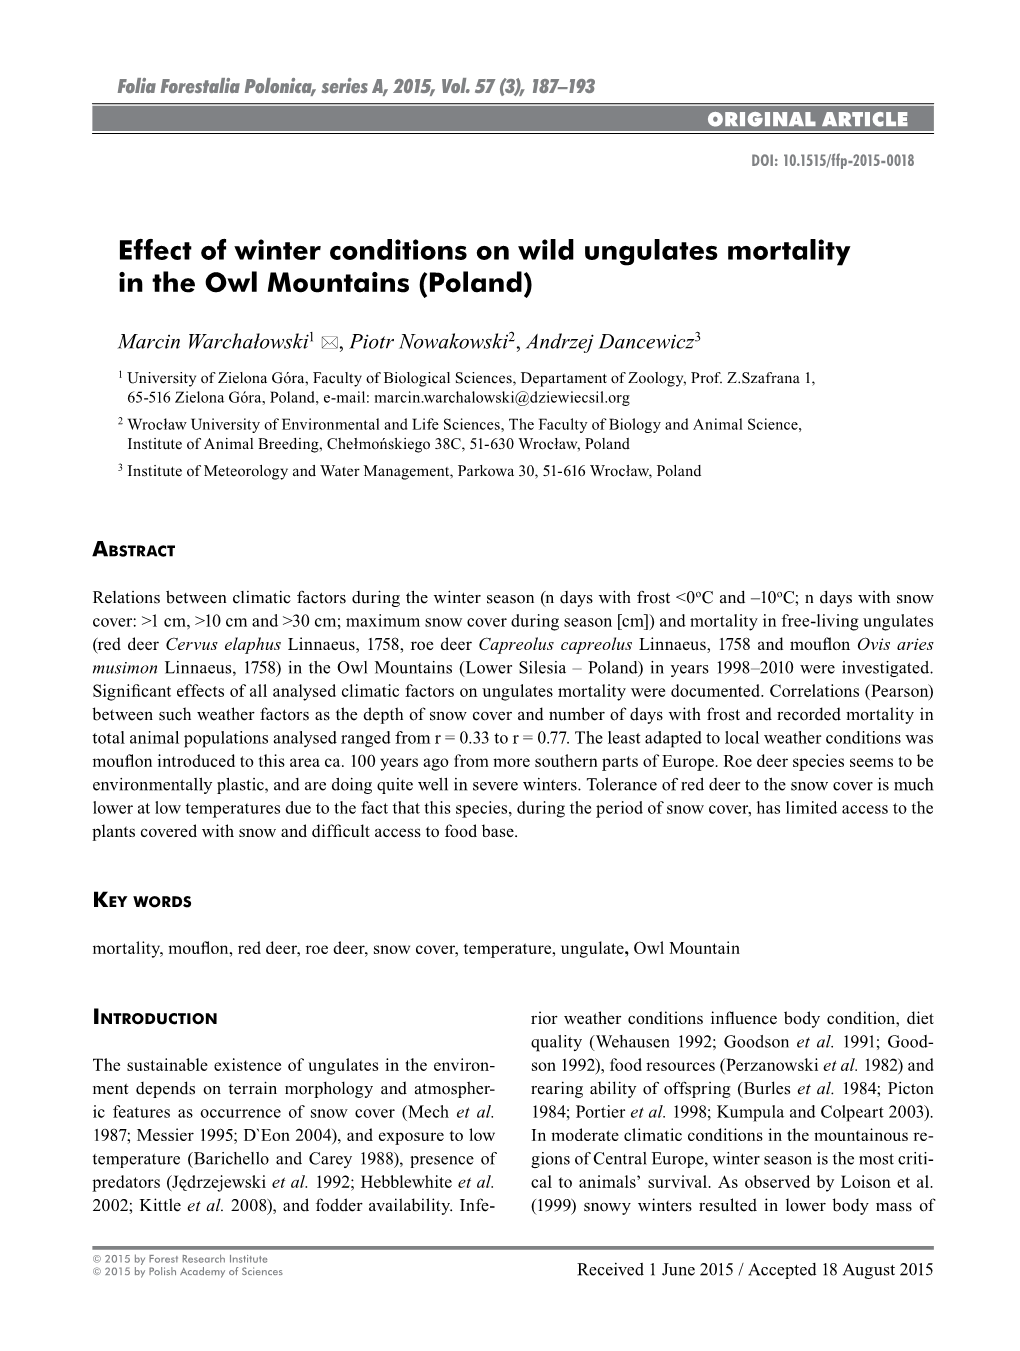 Effect of Winter Conditions on Wild Ungulates Mortality in the Owl Mountains (Poland)